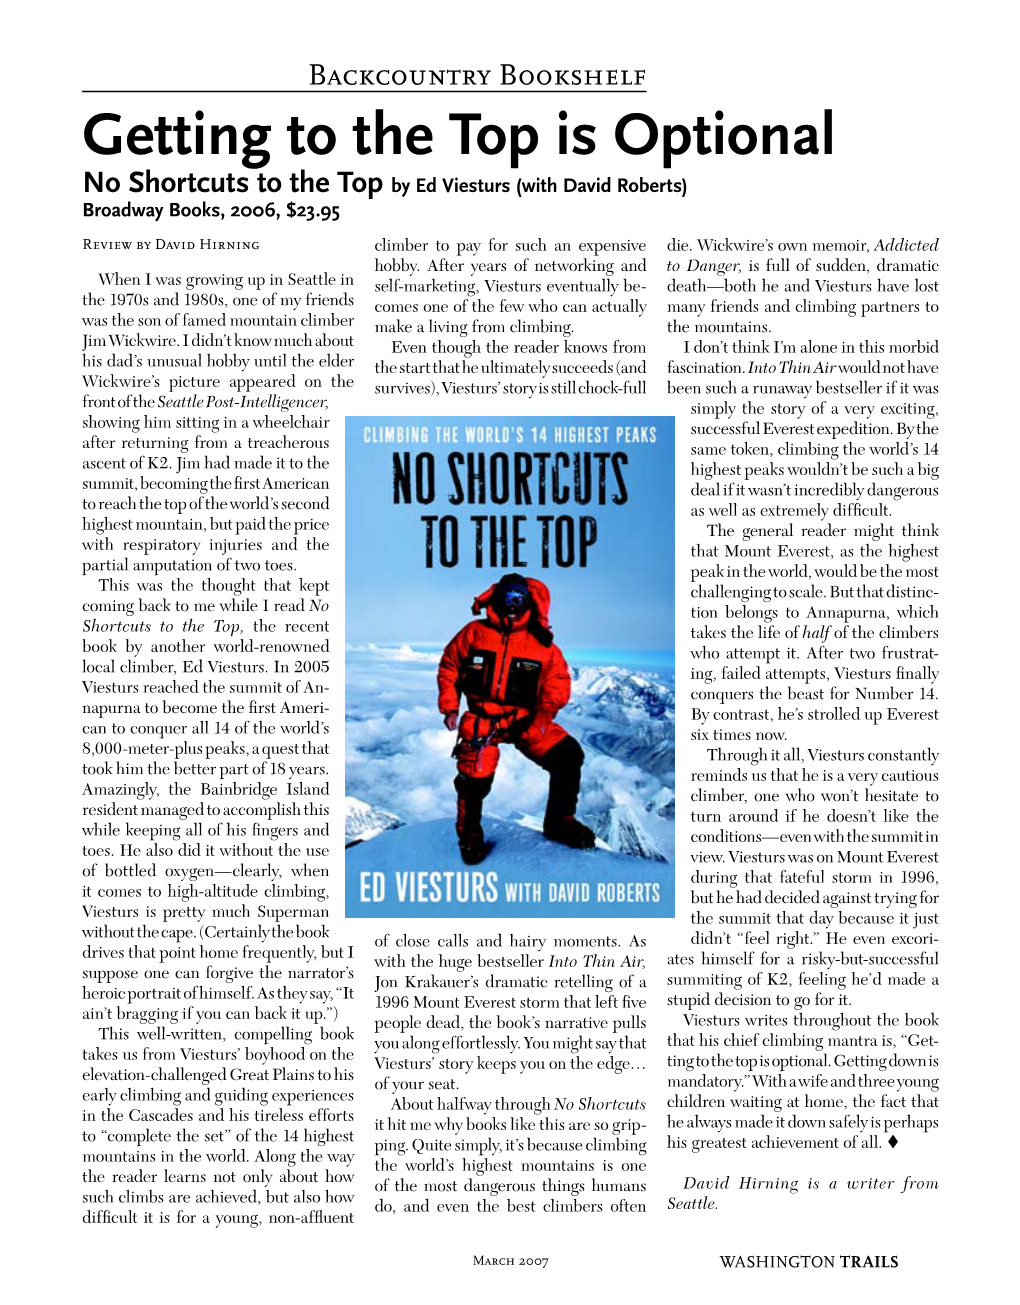 Getting to the Top Is Optional No Shortcuts to the Top by Ed Viesturs (With David Roberts) Broadway Books, 2006, $23.95